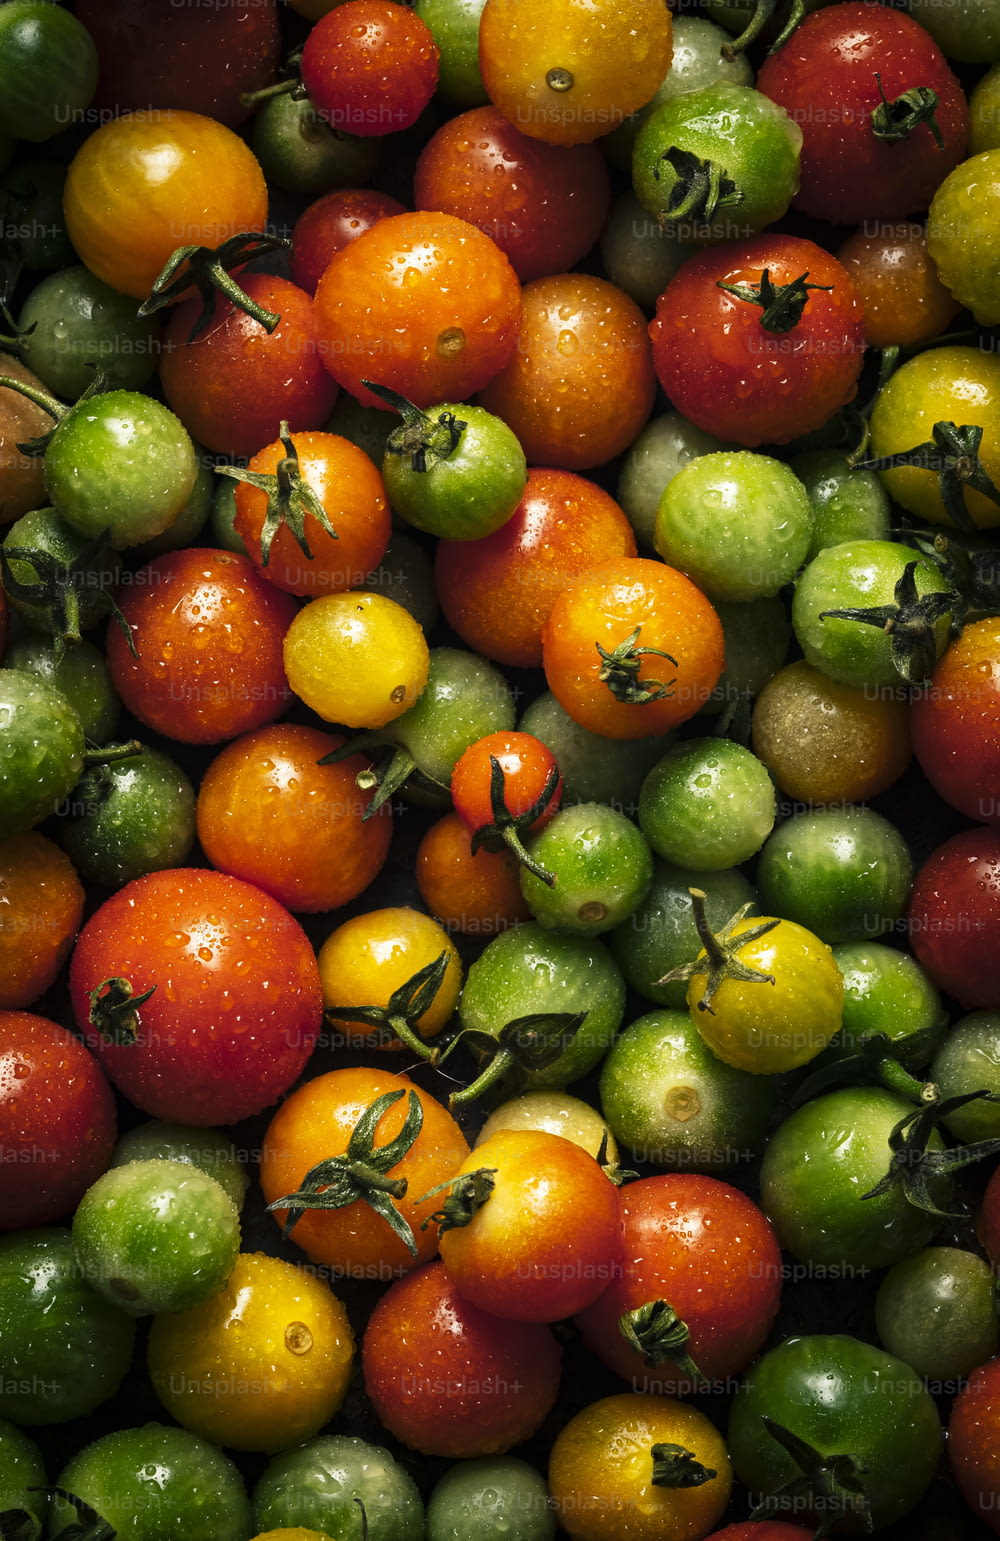 a large pile of tomatoes and other fruits